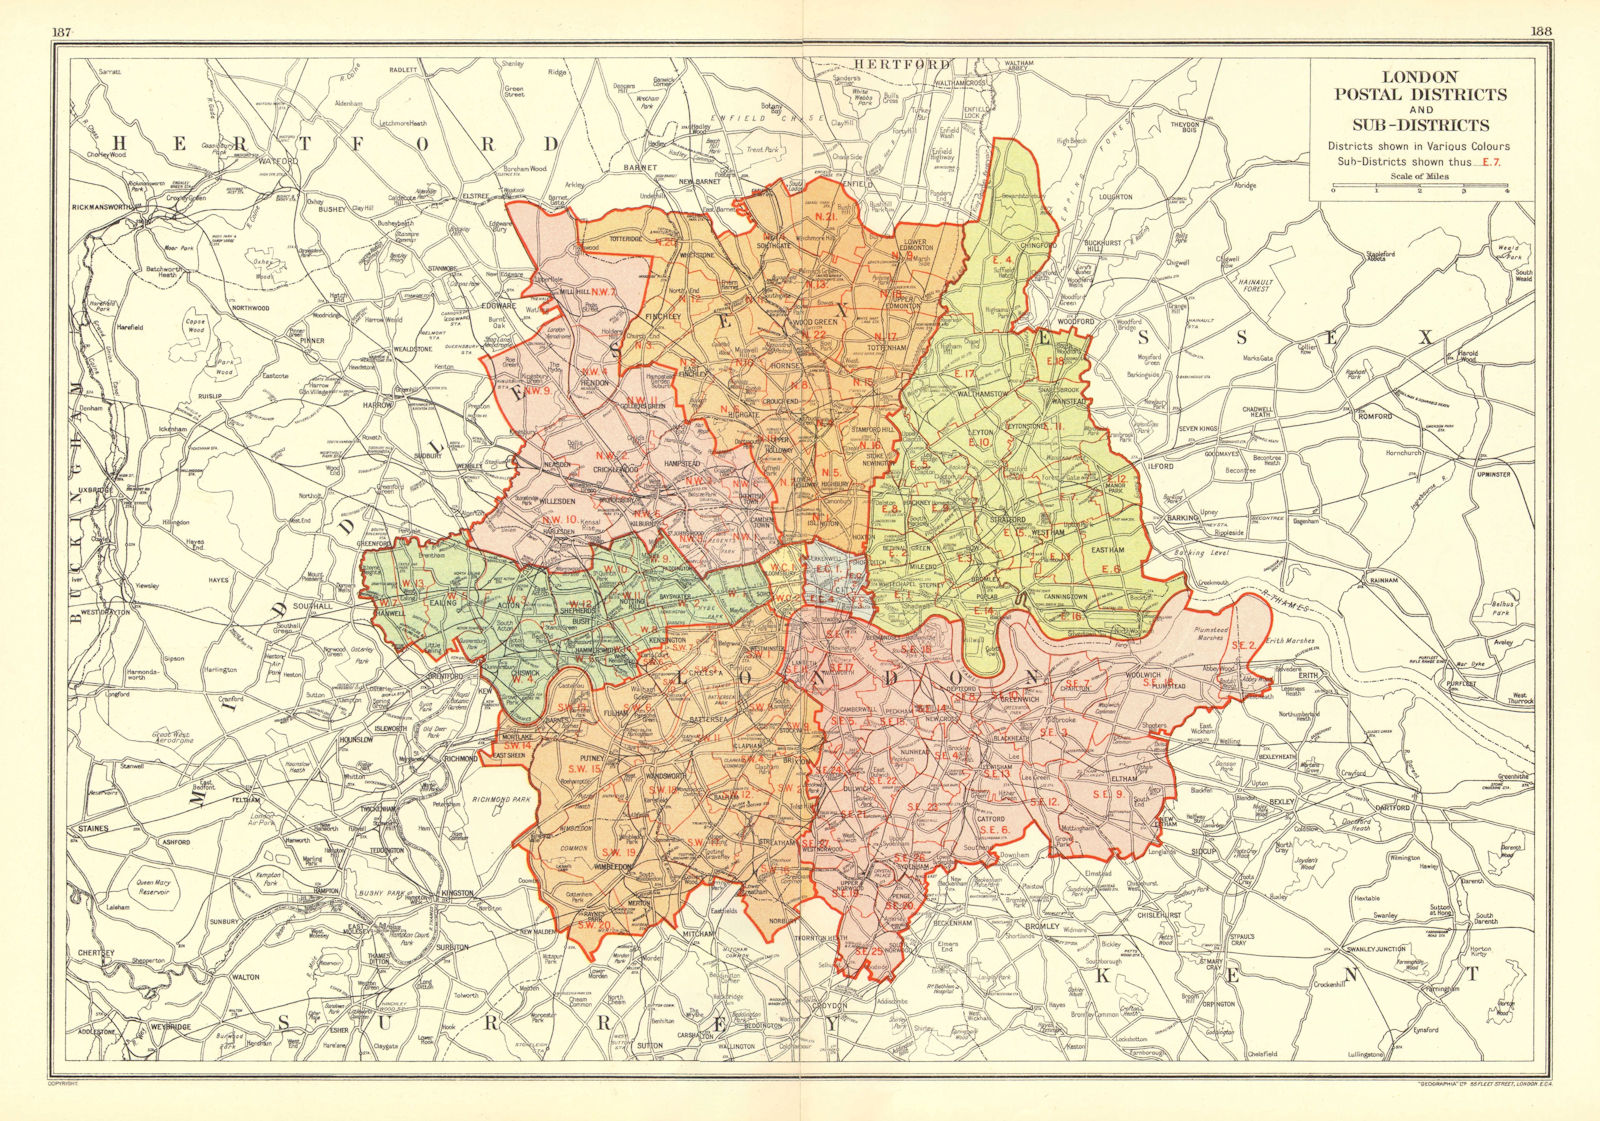 LONDON. Postal Districts and Sub-Districts. Postcodes 1937 old vintage map